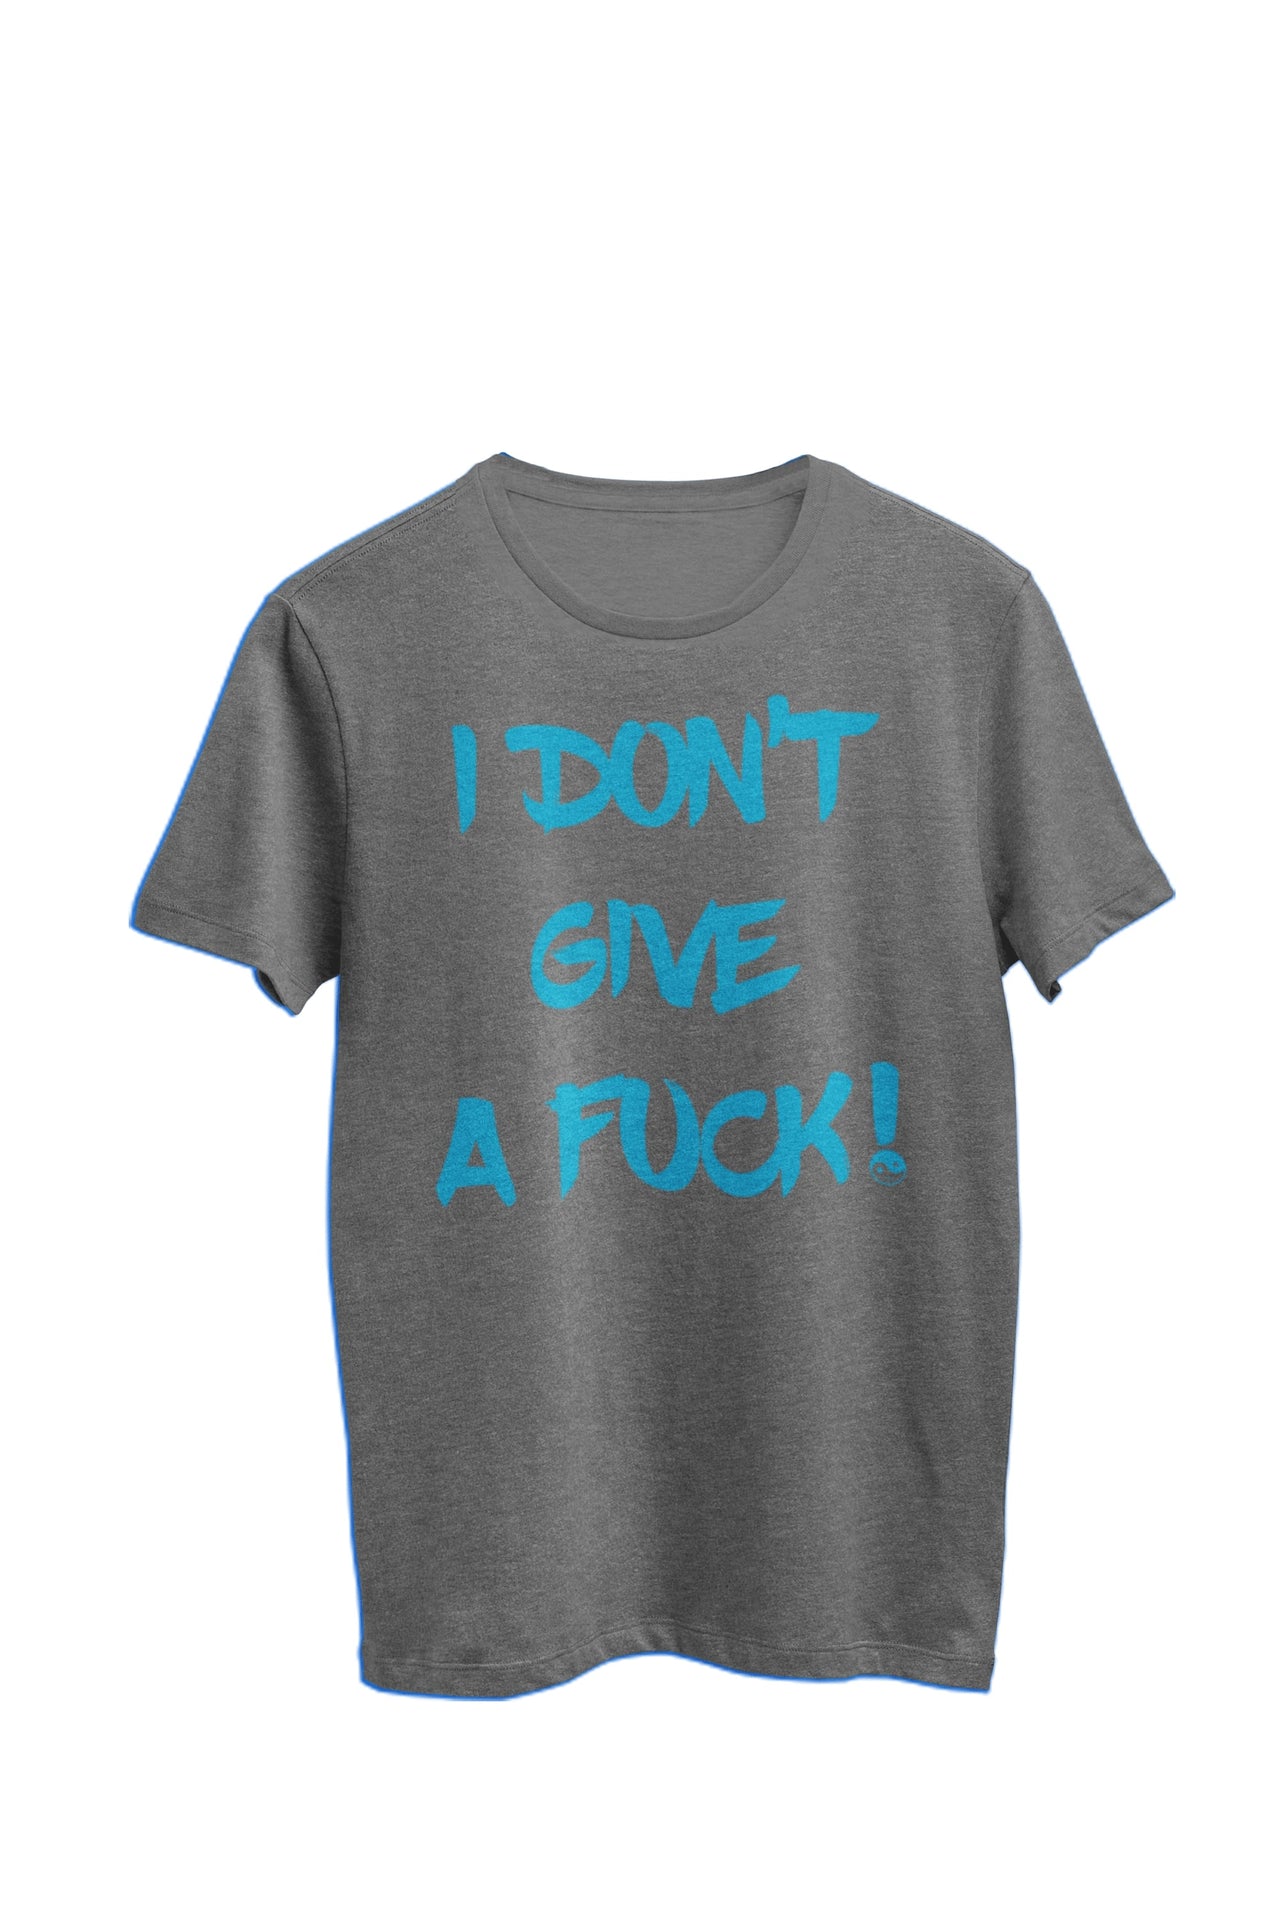 Gray Heather Unisex T-shirt featuring the bold statement 'I don't give a fuck'. Designed by WooHoo Apparel